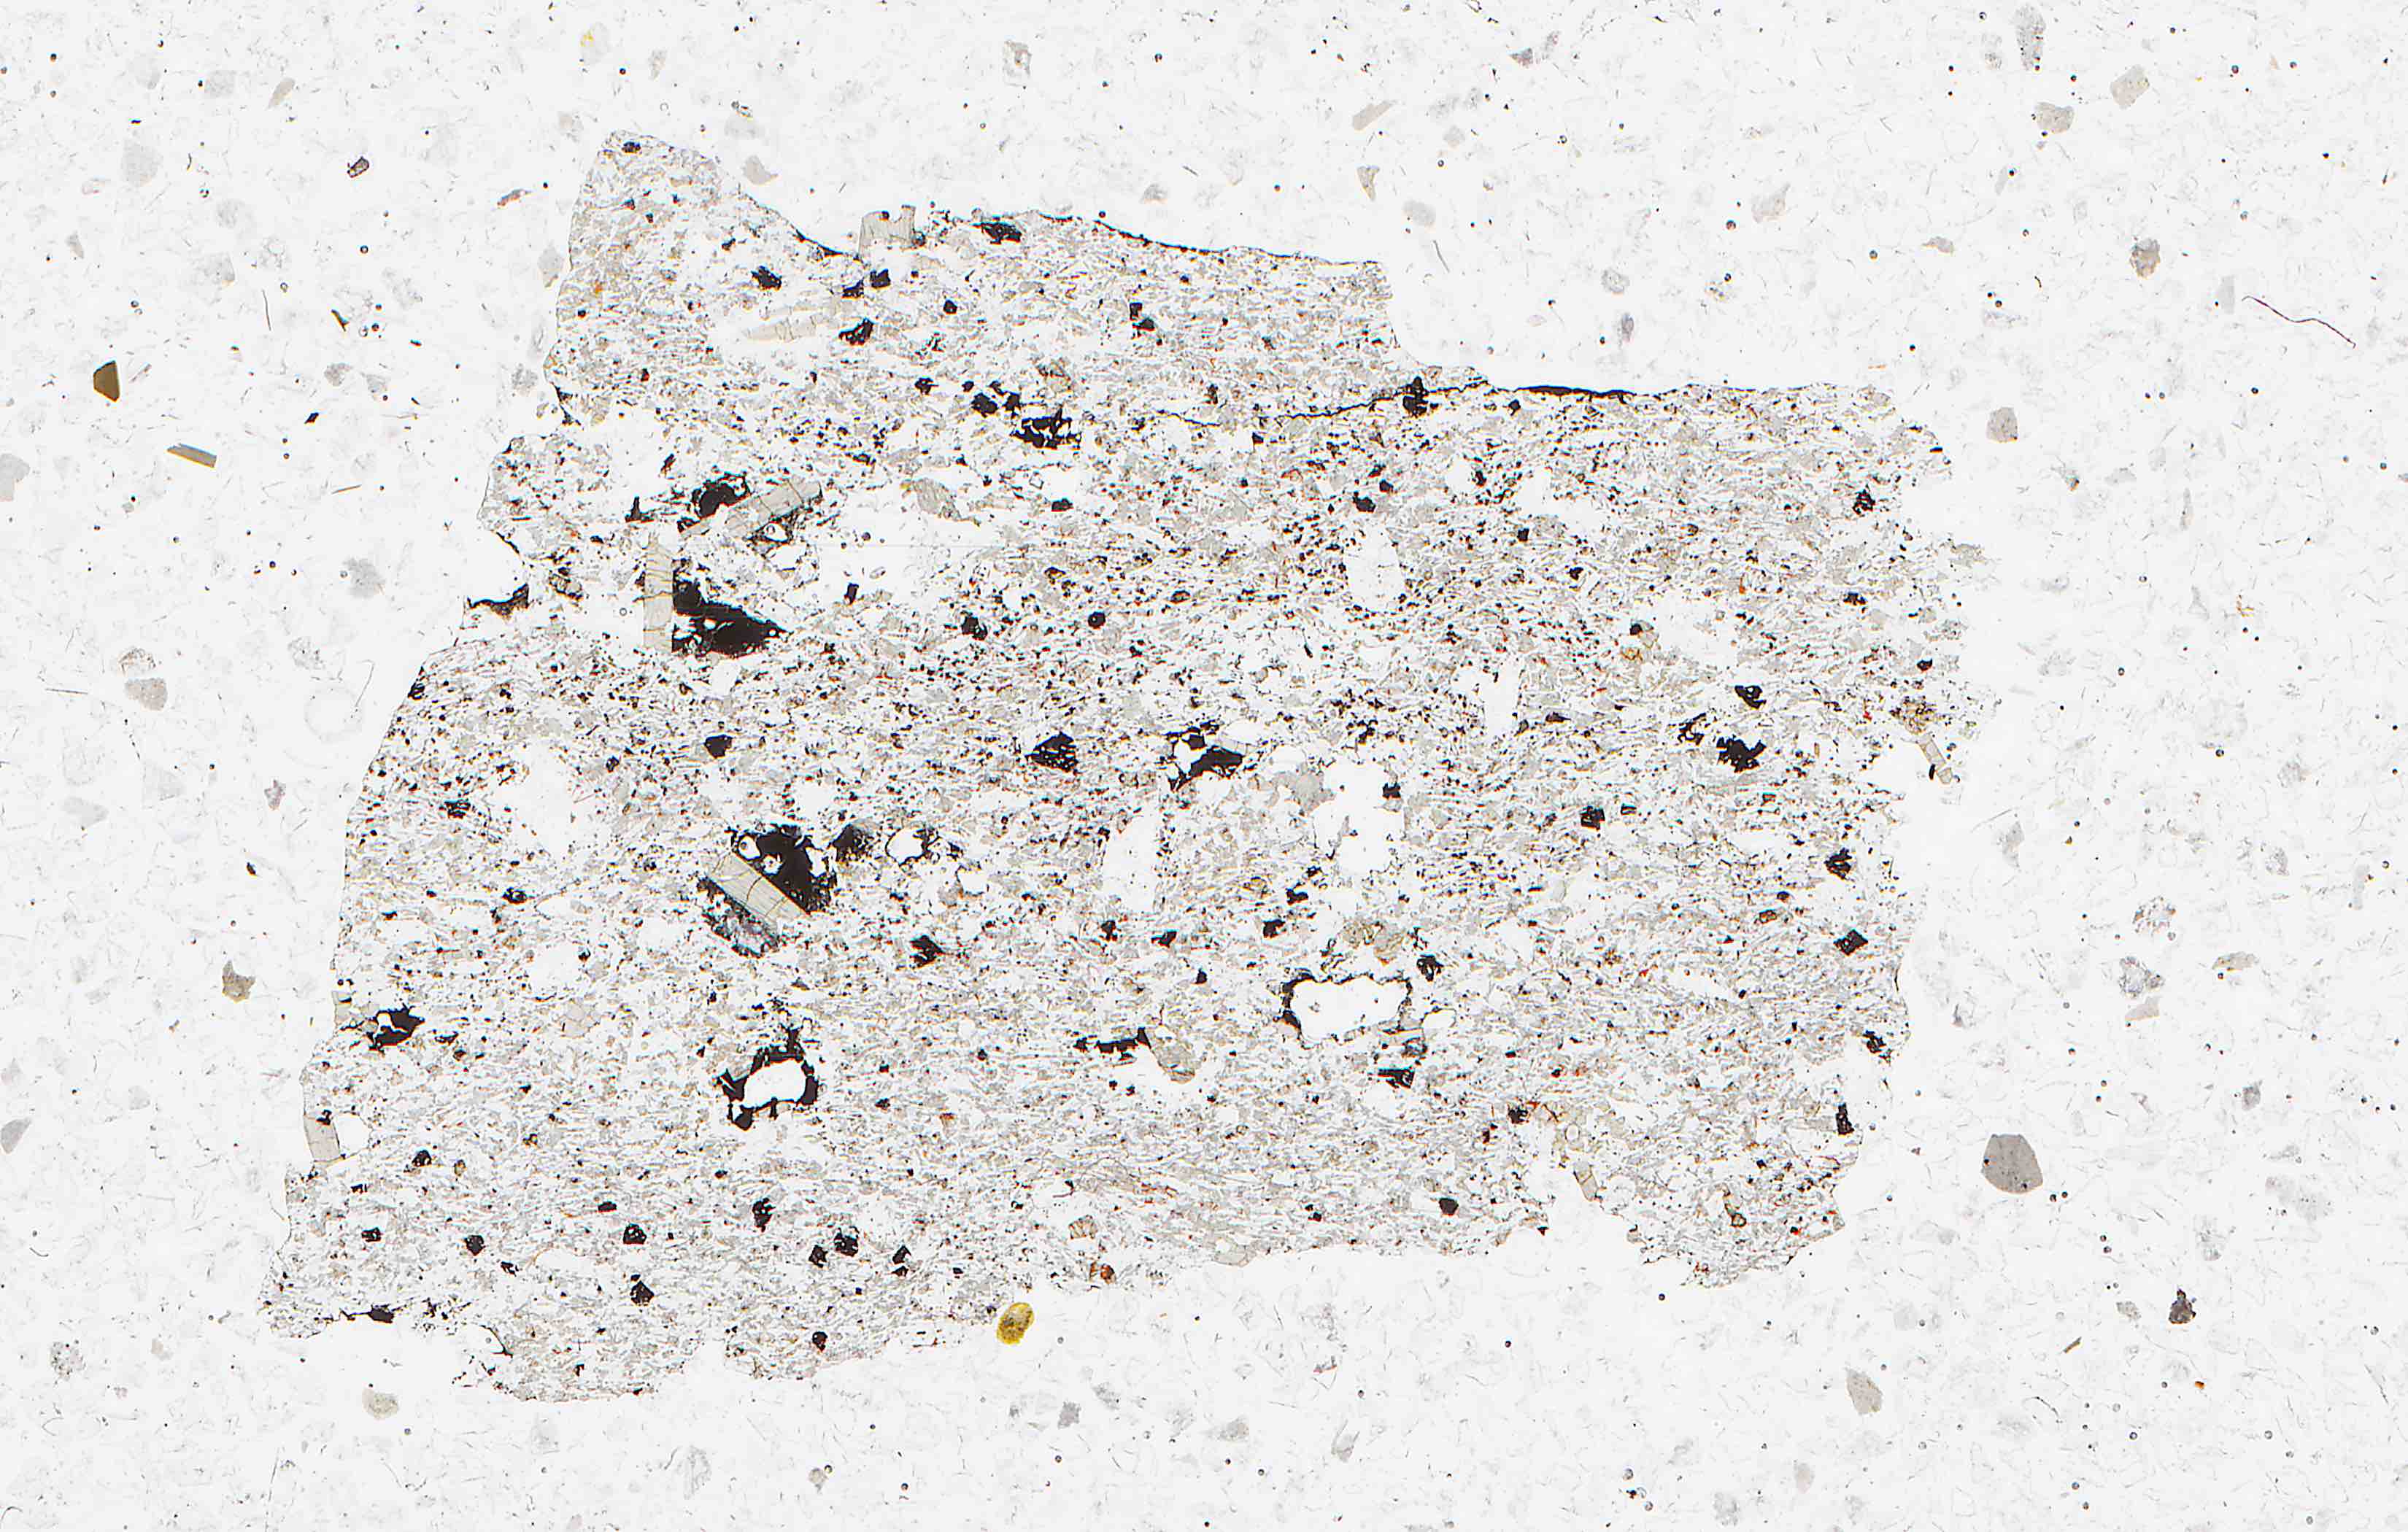 fayalite in thin section from Oregon